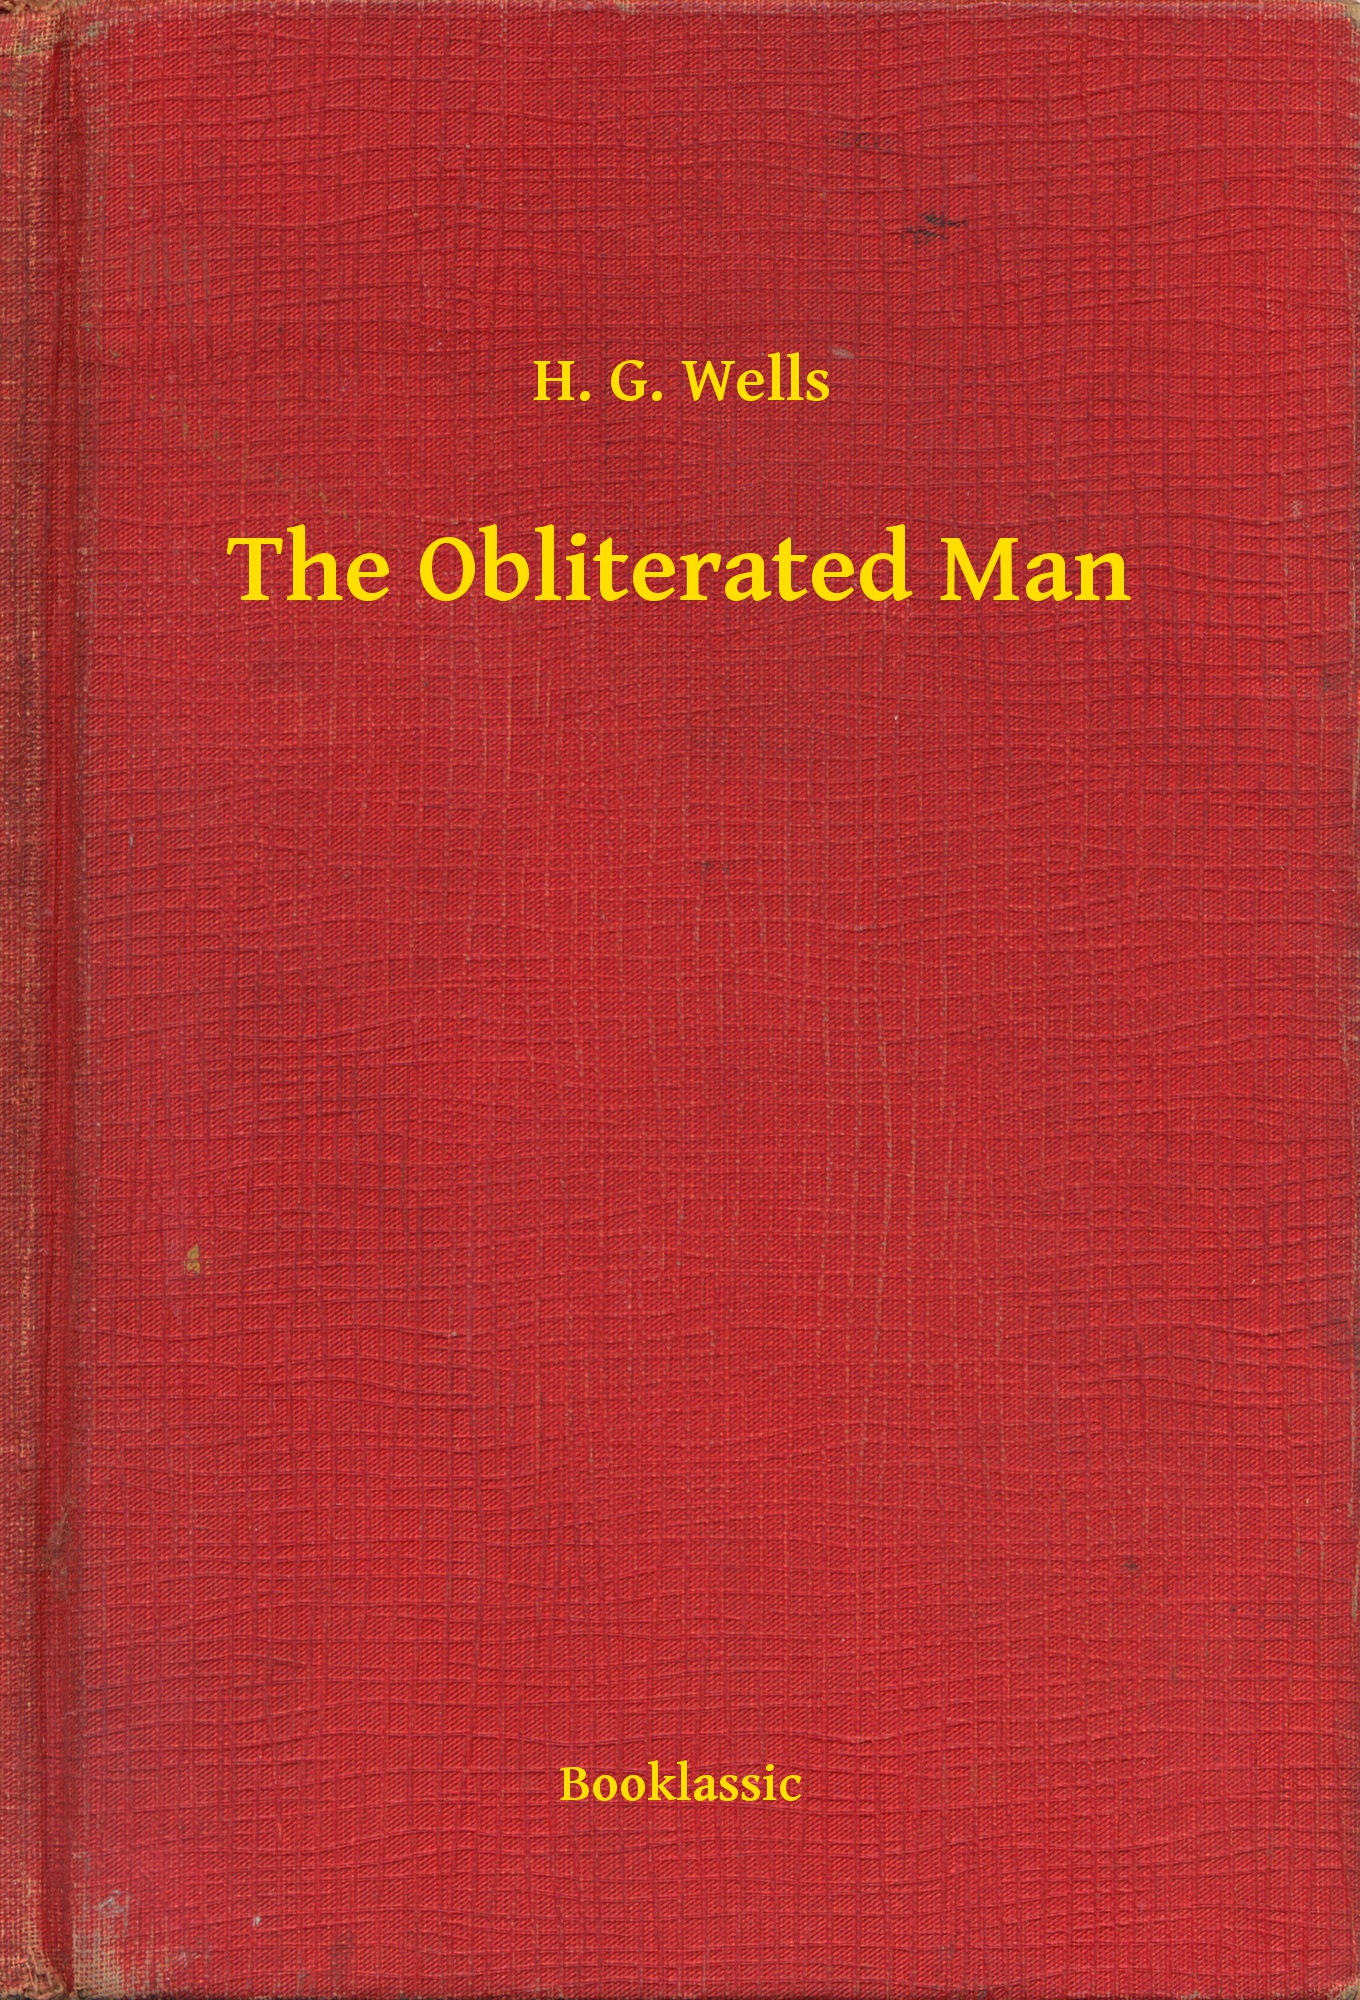 The Obliterated Man